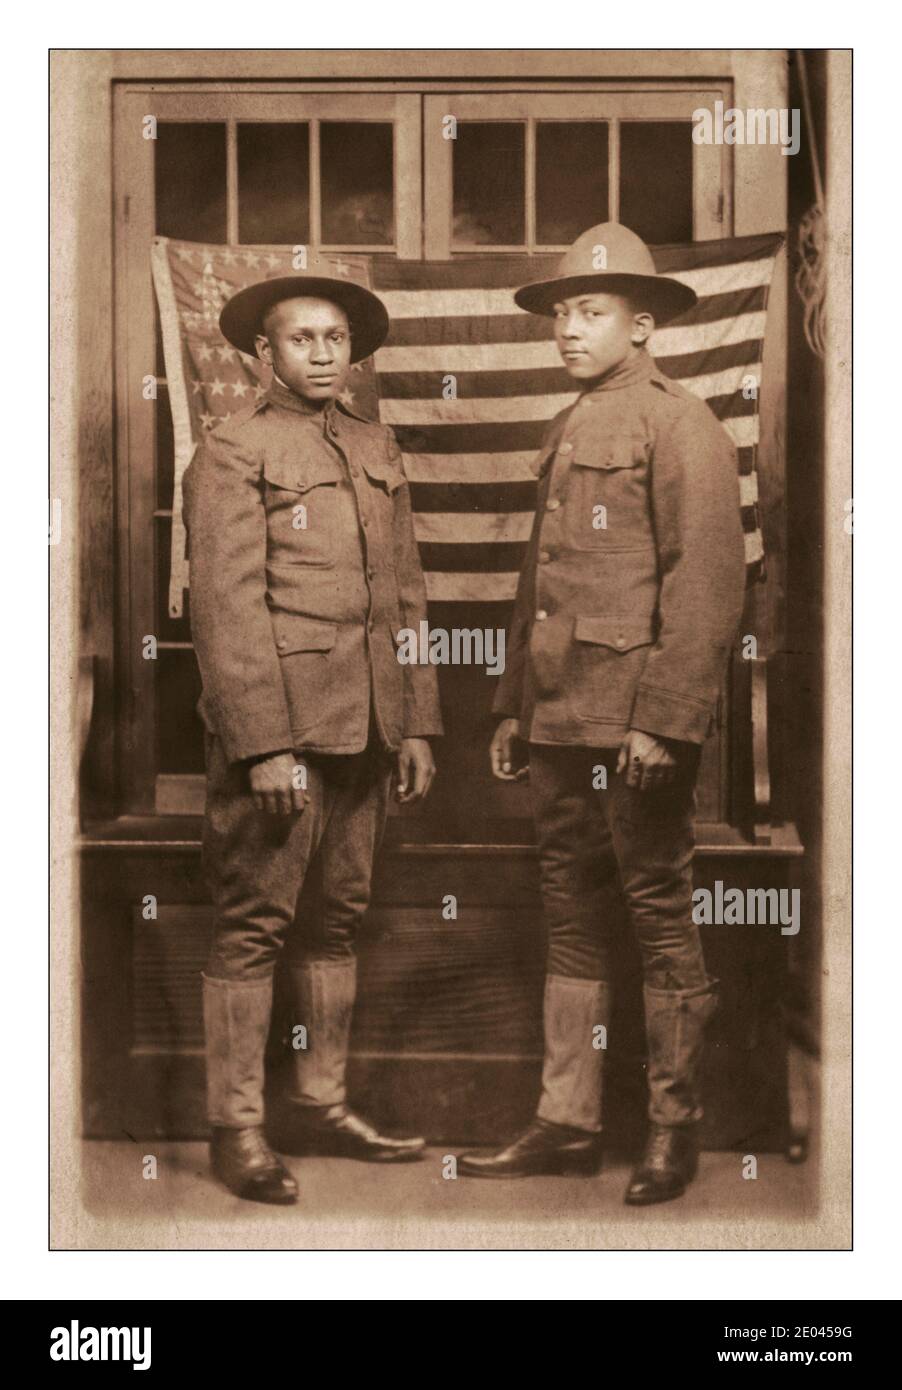 WW1 Propaganda Photo showing the contribution black African Americans gave to the First World War .Two unidentified African American soldiers in uniforms and campaign hats standing in front of American flag WW1 1918 [between 1917 and 1918]. United States.--Army--People--1910-1920 World War, 1914-1918--Military personnel--American African Americans--Military service--1910-1920 -  Soldiers--American--1910-1920 Military uniforms--American--1910-1920 Flags--American--1910-1920 Group portraits--1910-1920. Photographic postcards--1910-1920. Photographic prints--1910-1920. Portraits Stock Photo